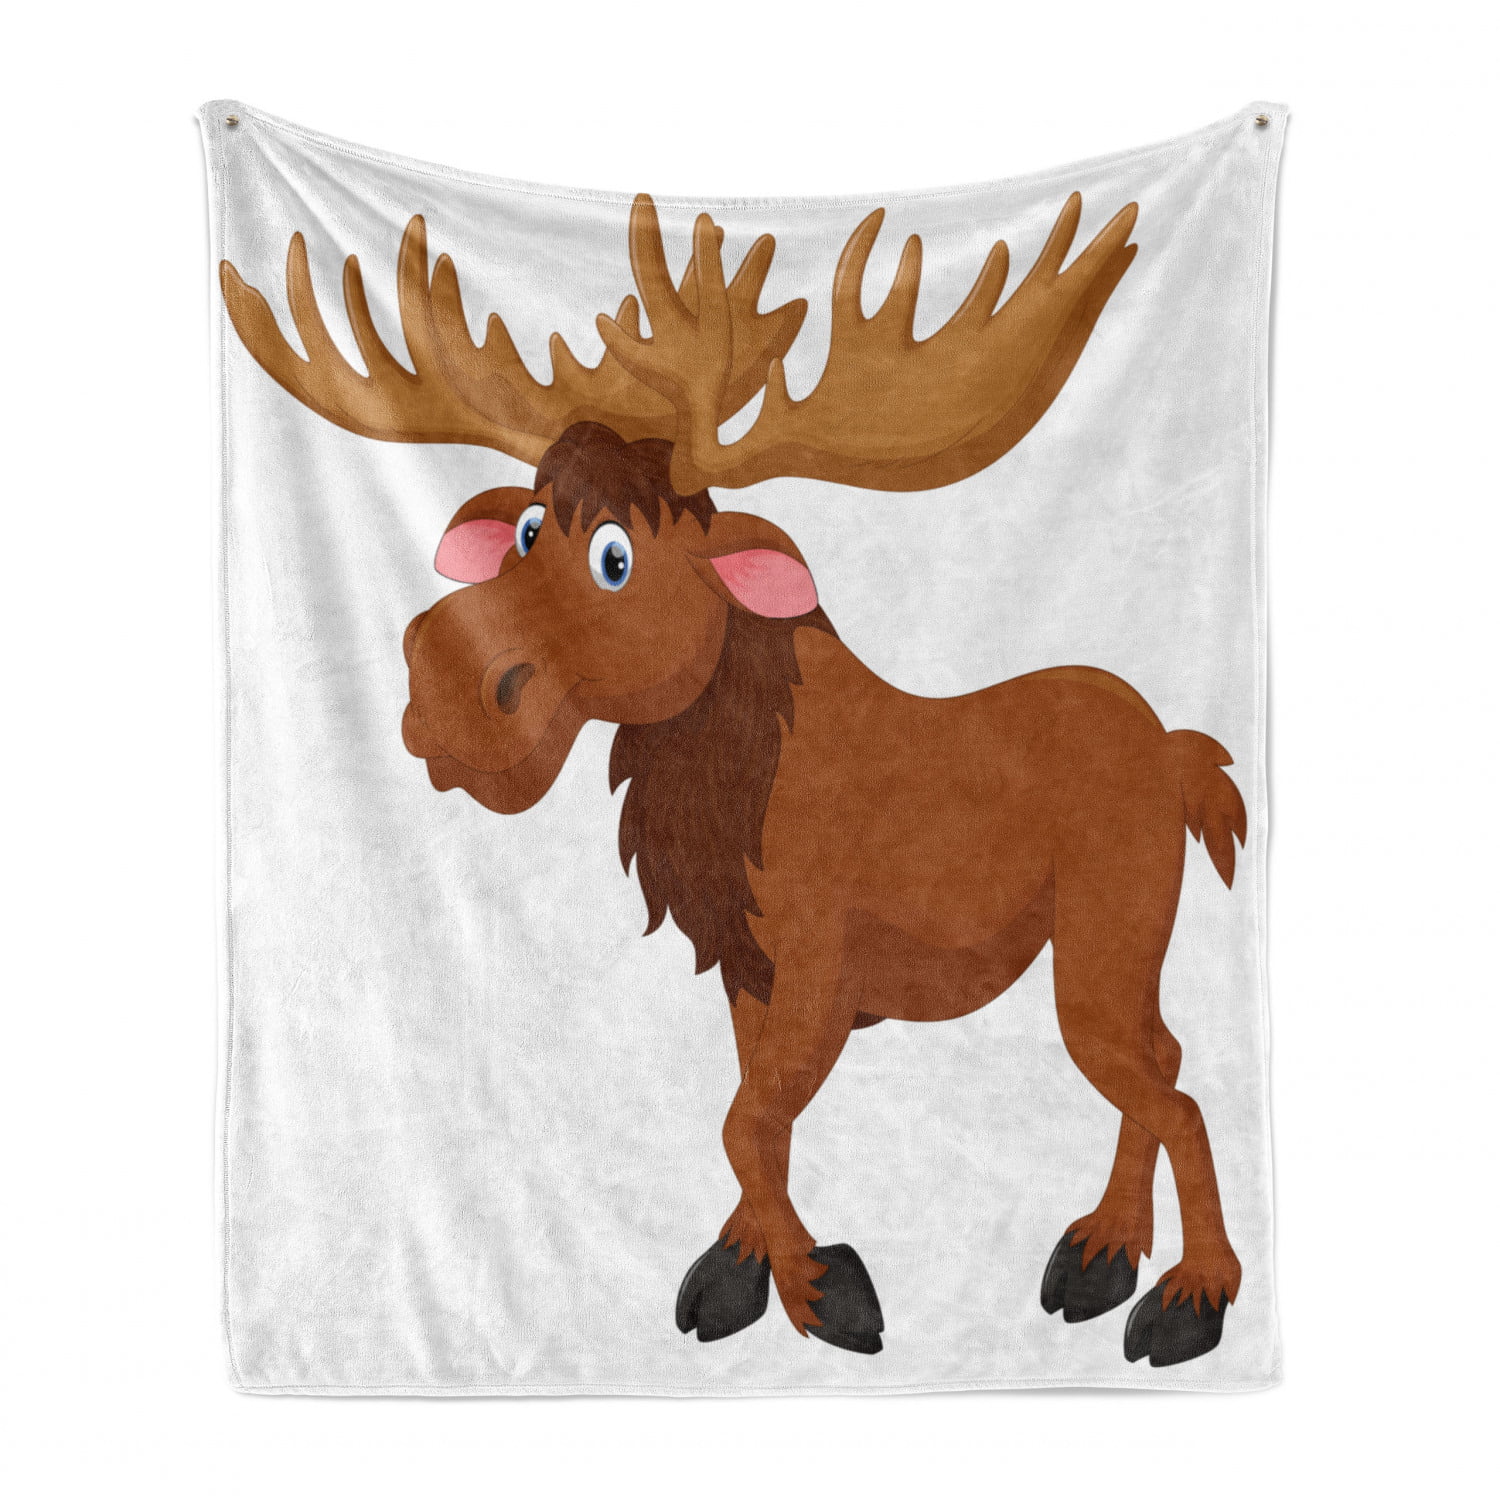 Moslion Brown Moose Throw Blanket Beautiful Animal Forest Male Bull Elk Cute Deer Big 50x60 Inch Warm Cozy Flannel Plush Throws Blankets for Bedding Sofa Couch